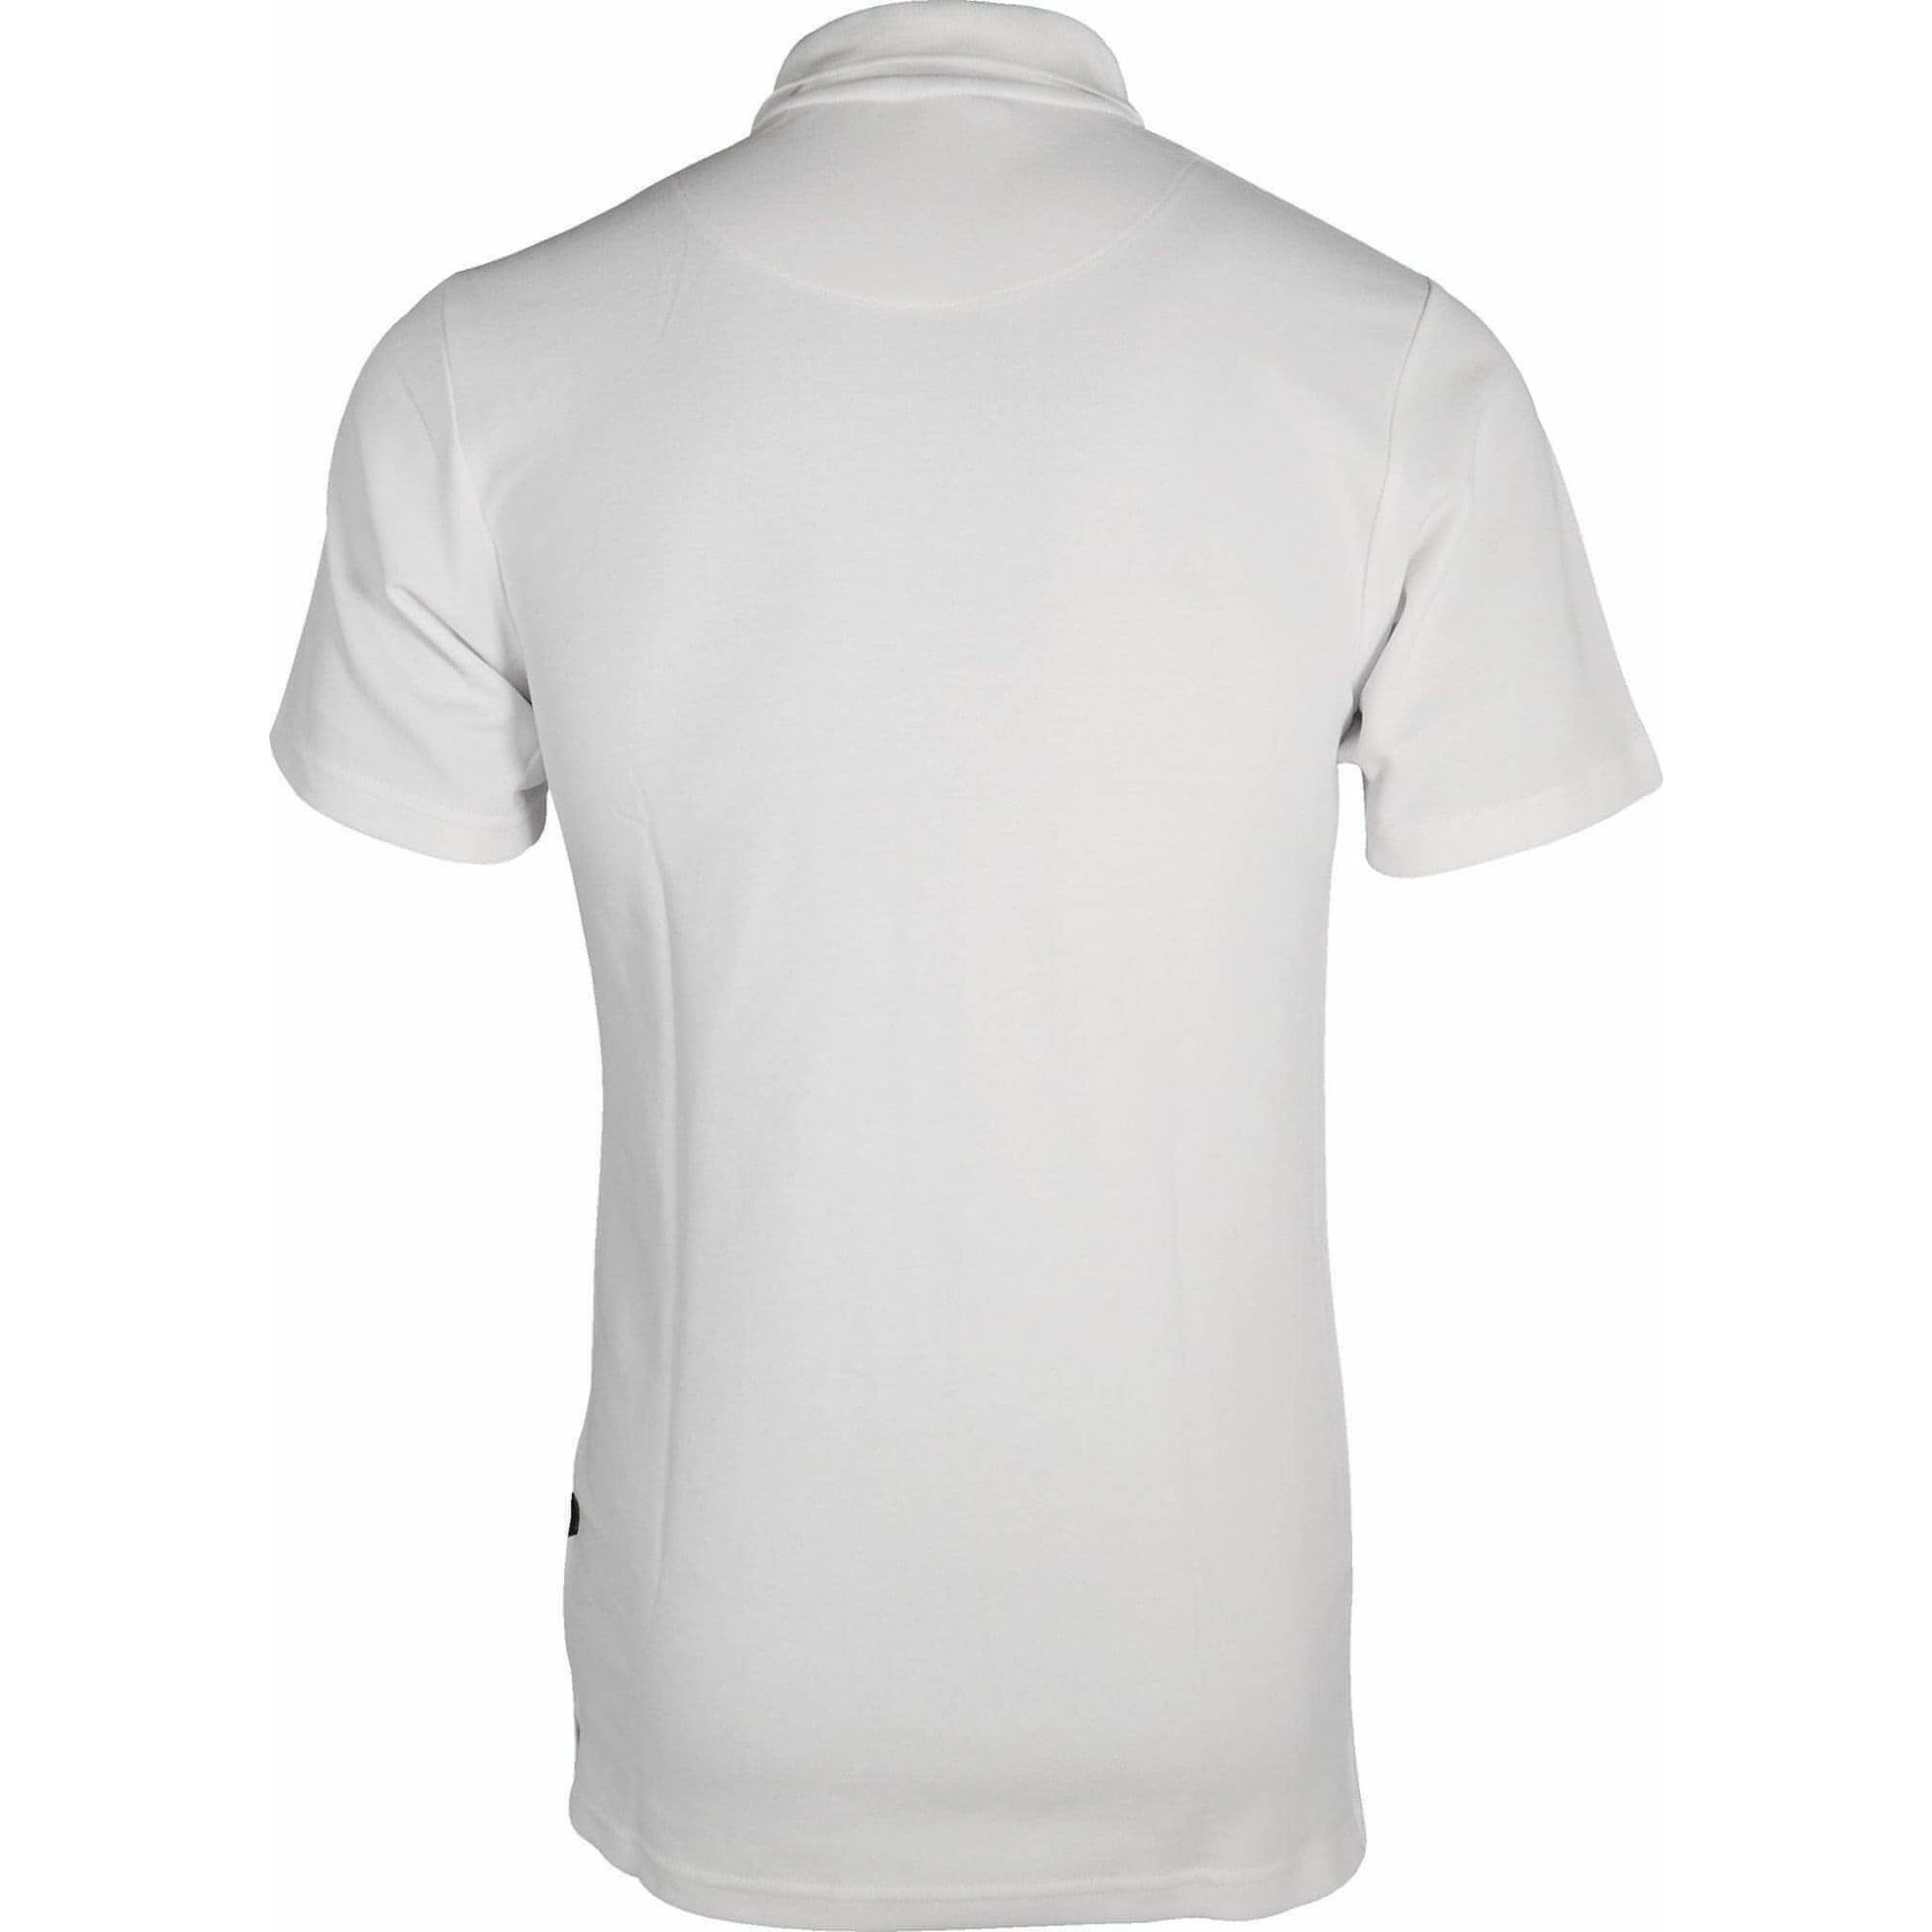 iD Workwear Ultimate Cotton Short Sleeve Mens Polo Shirt - White - Start Fitness